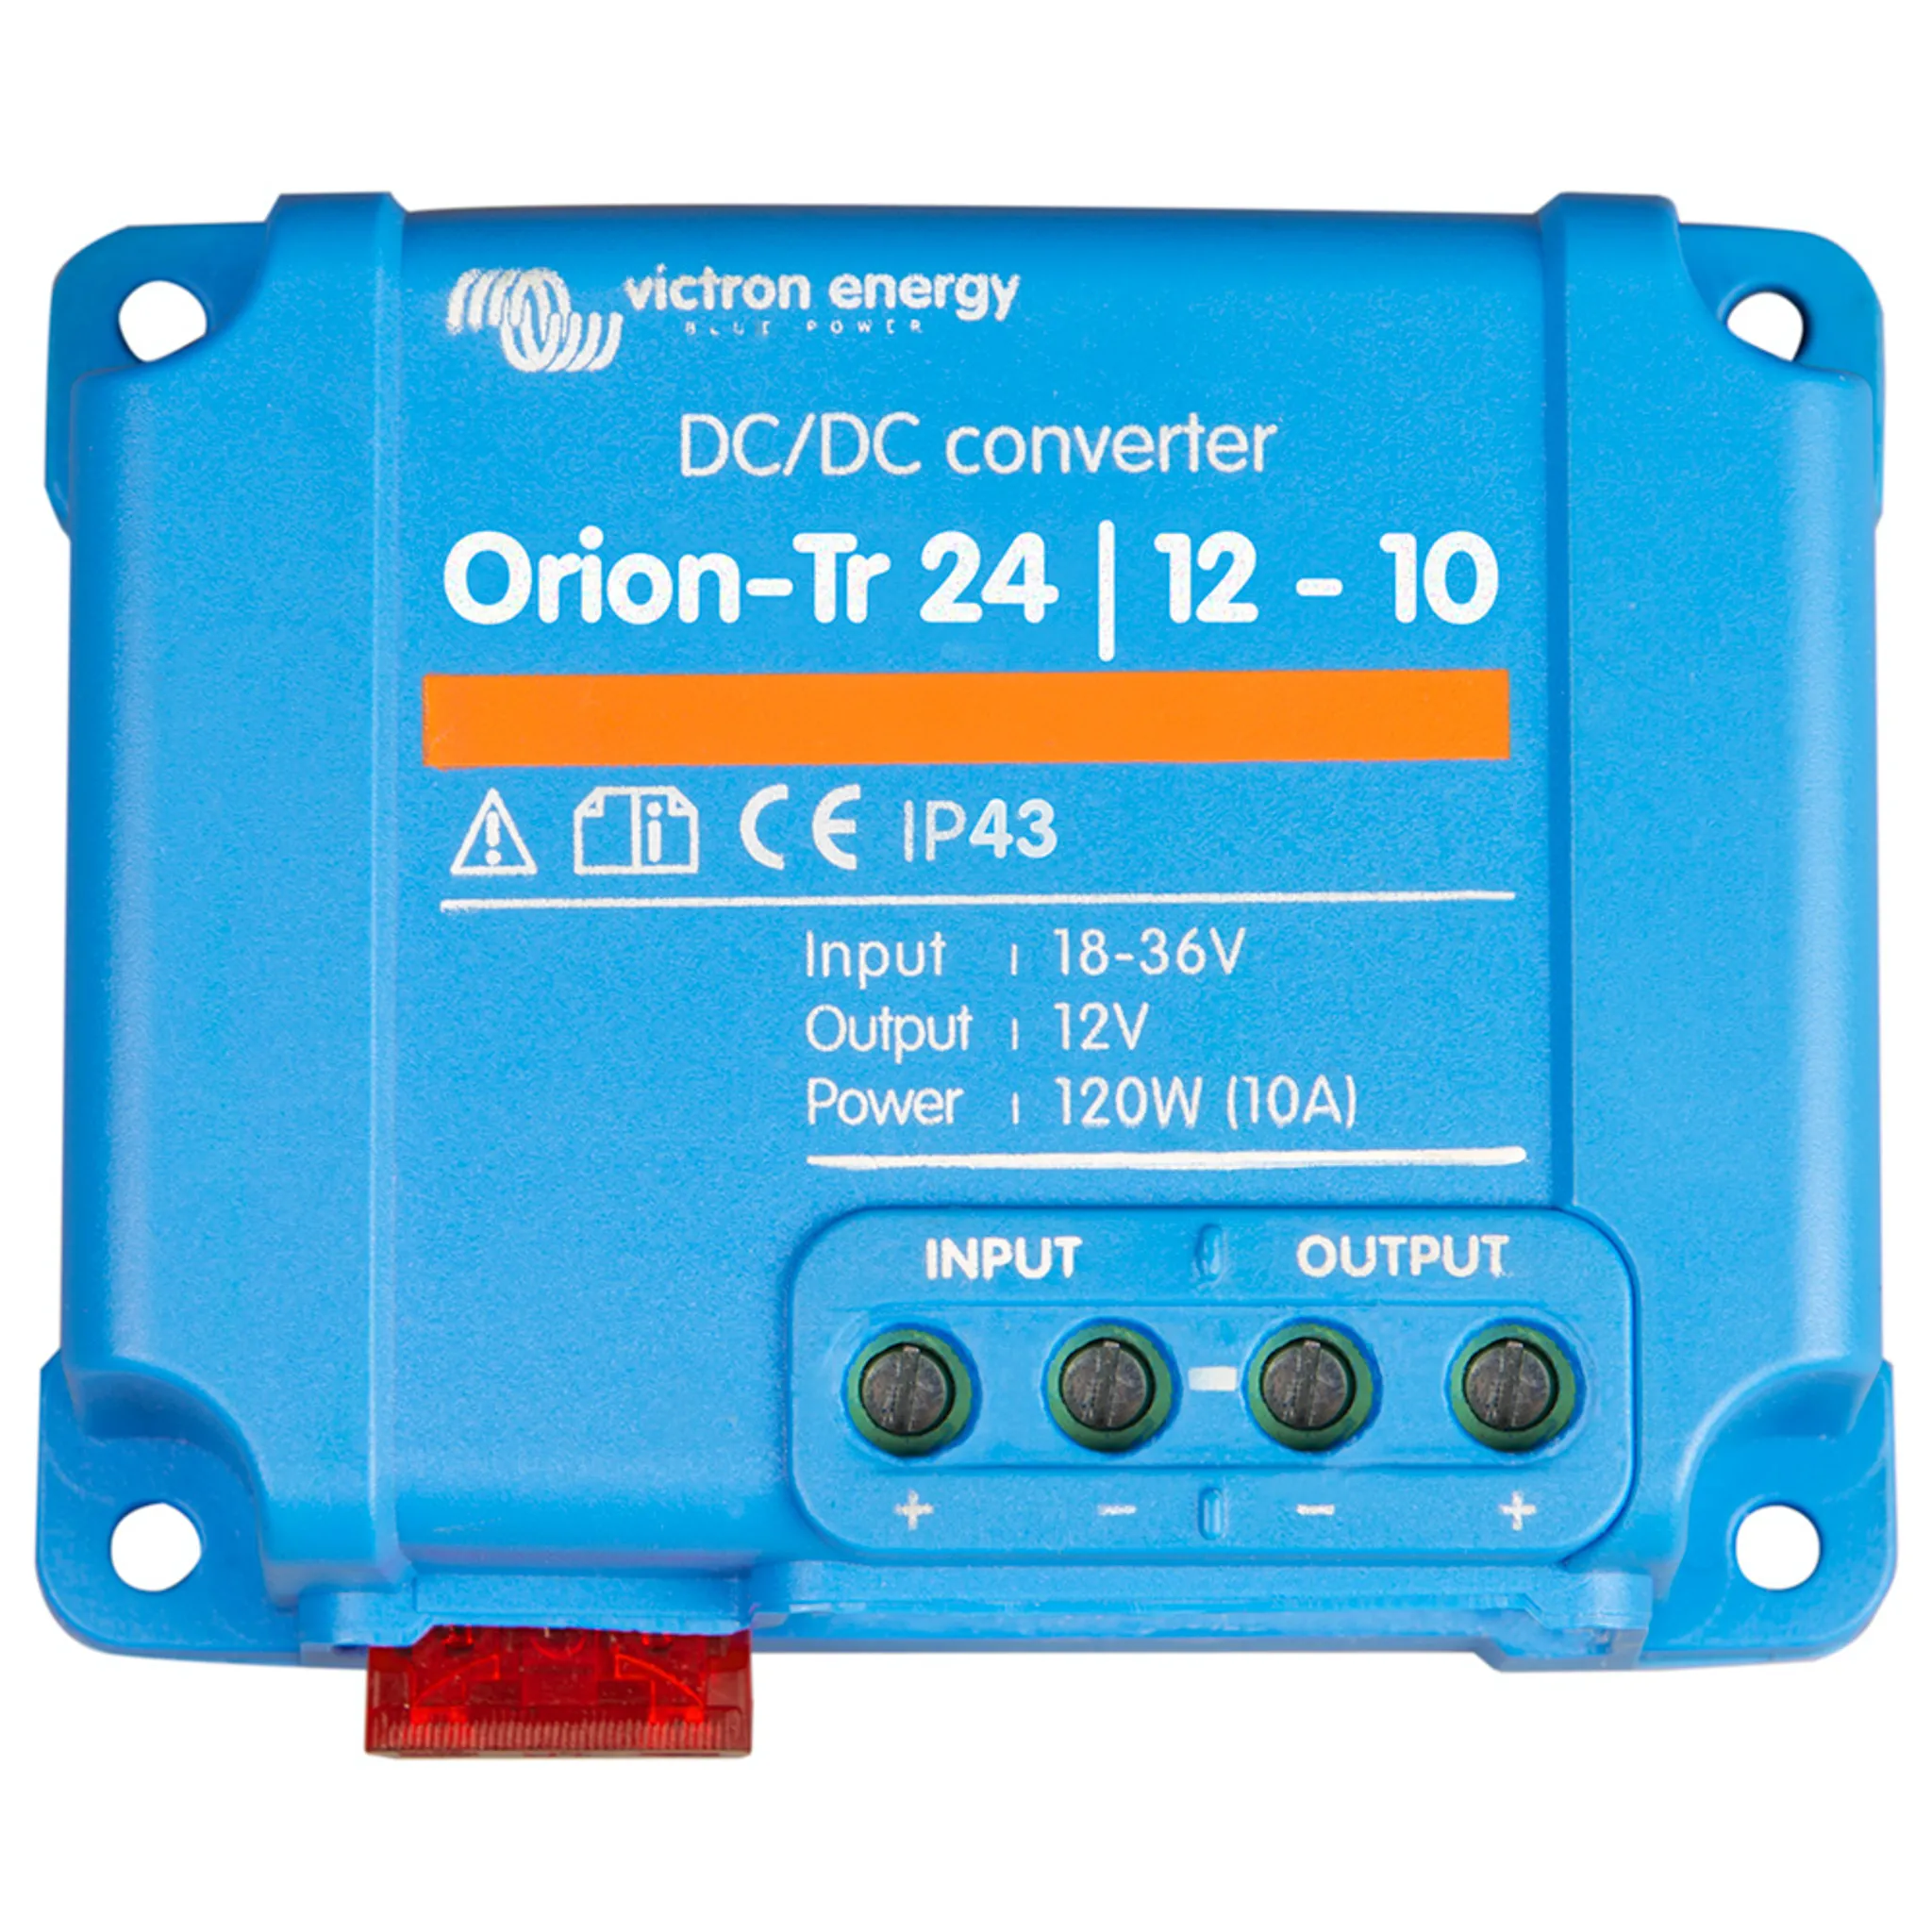 Victron Orion-Tr 24/12-10 120W DC DC Wandler